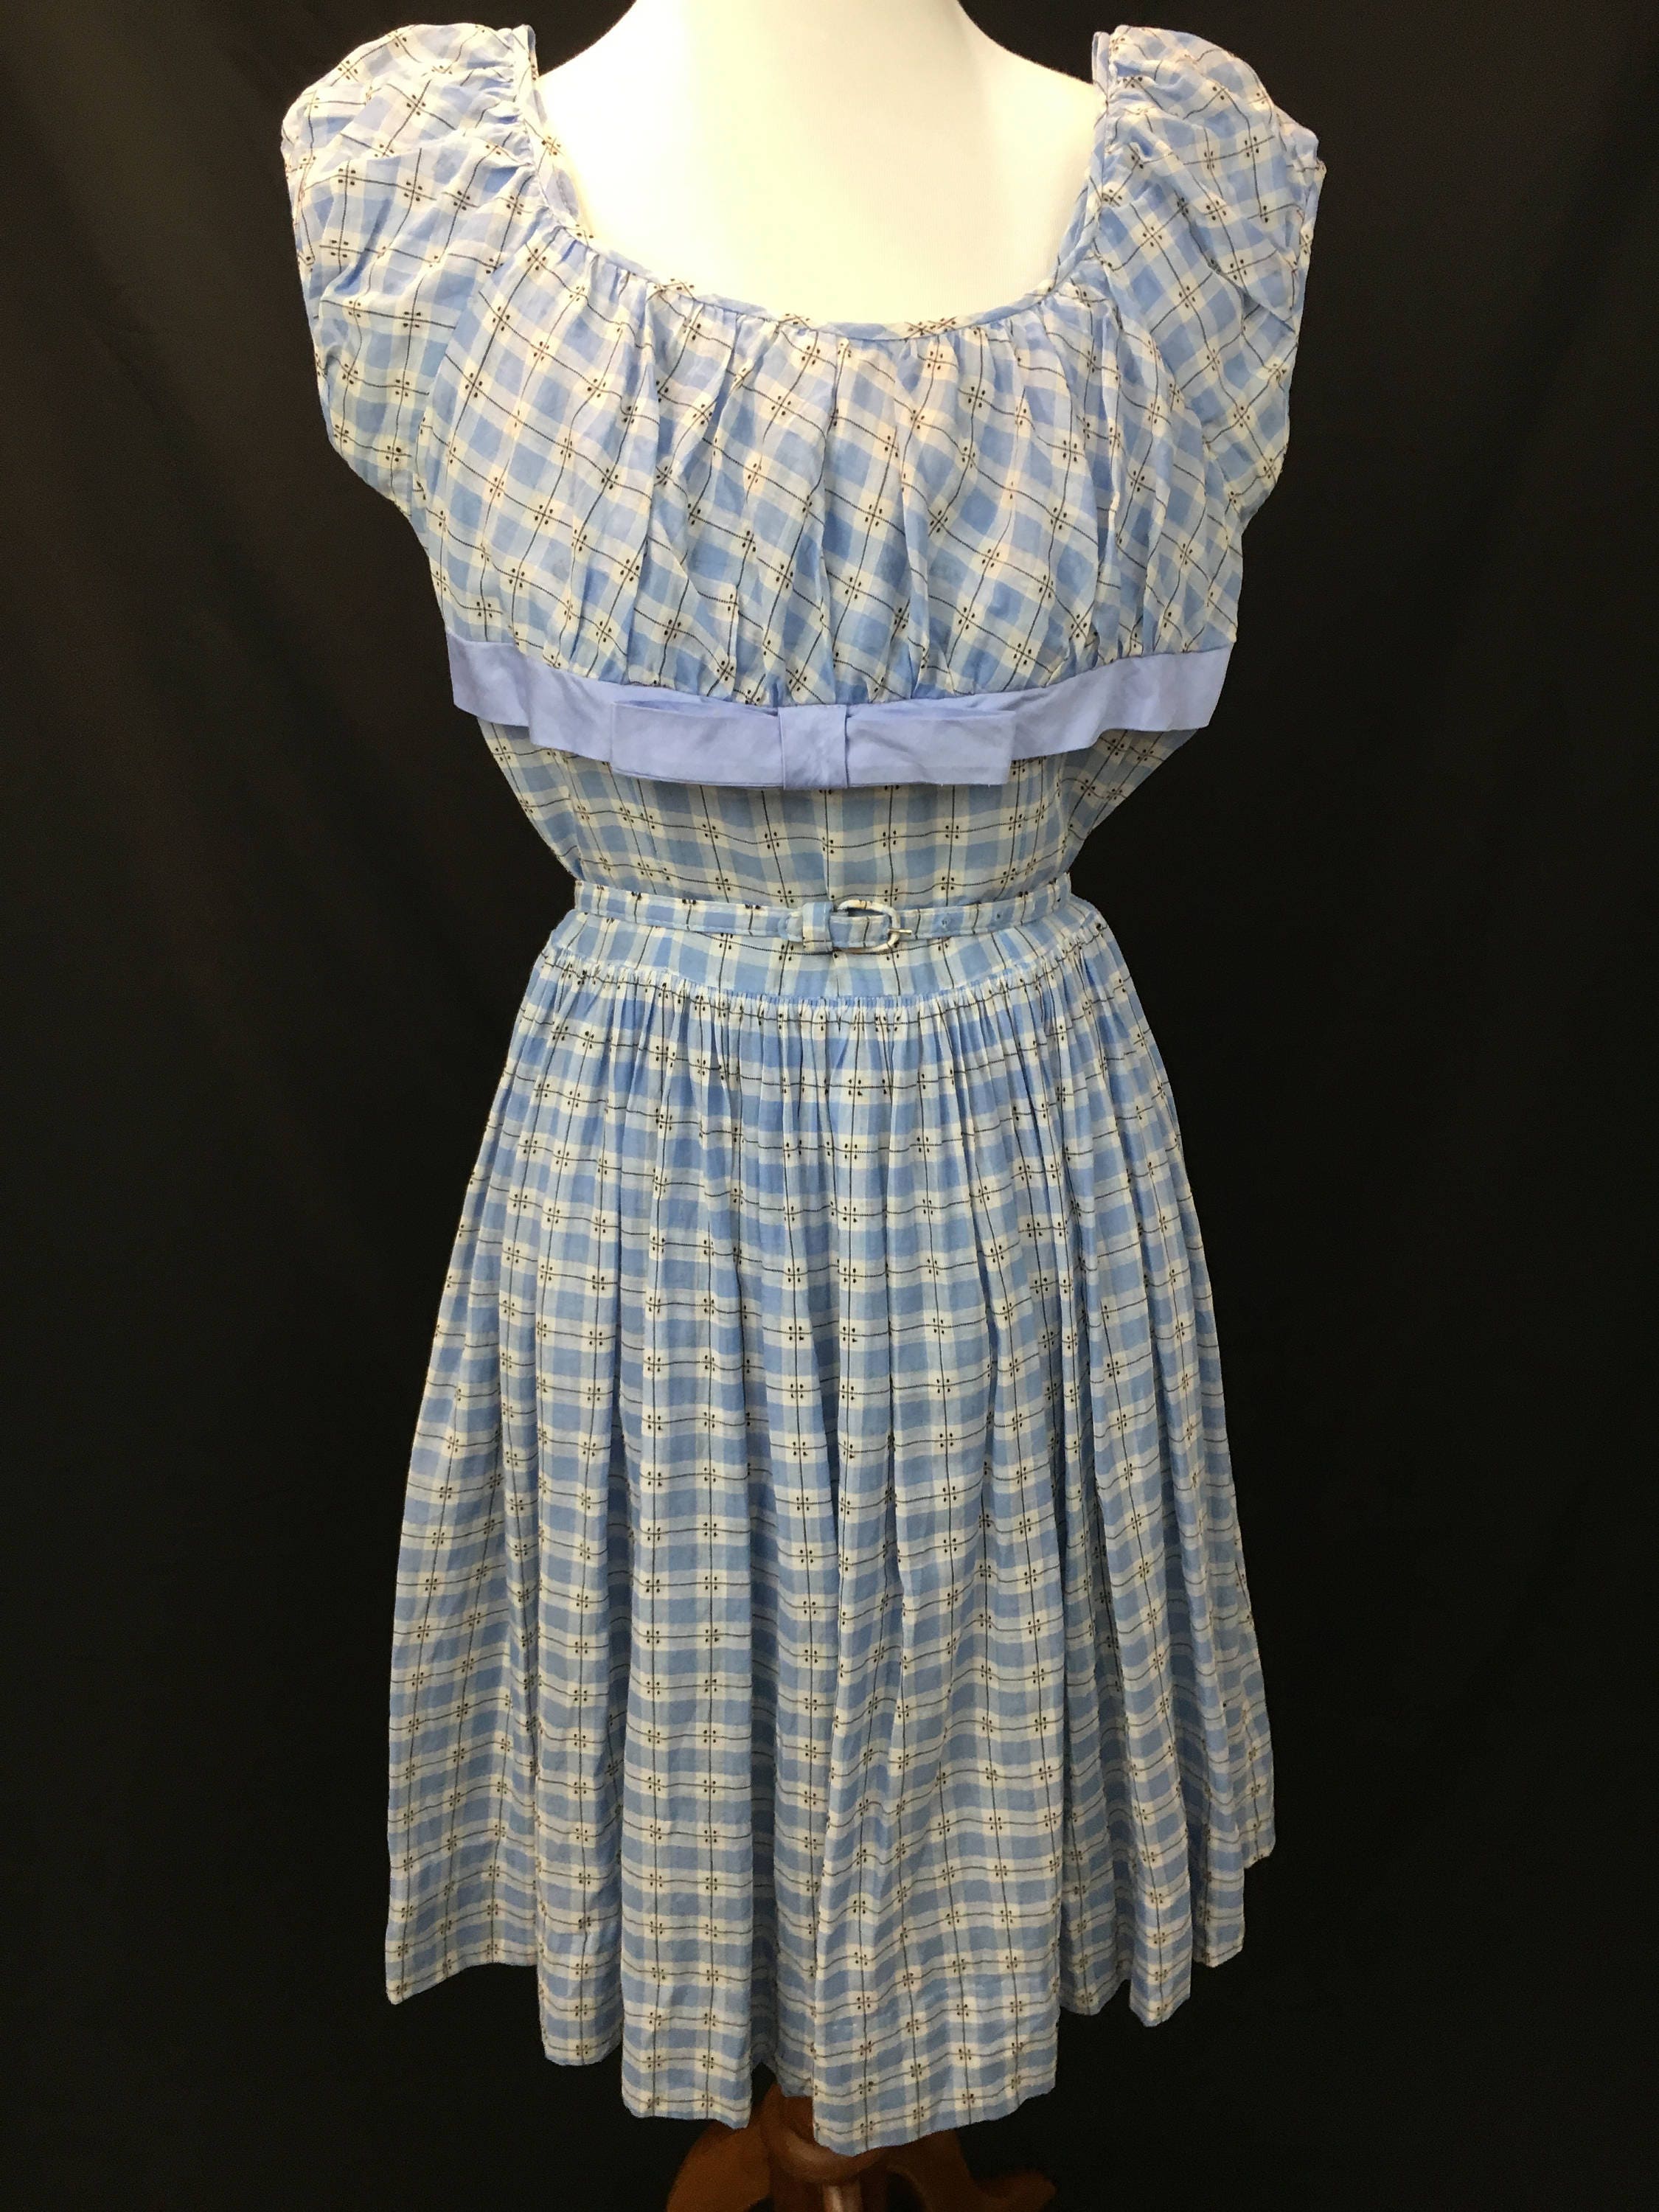 Adorable 1950's Blue & White Check Day Dress | Etsy